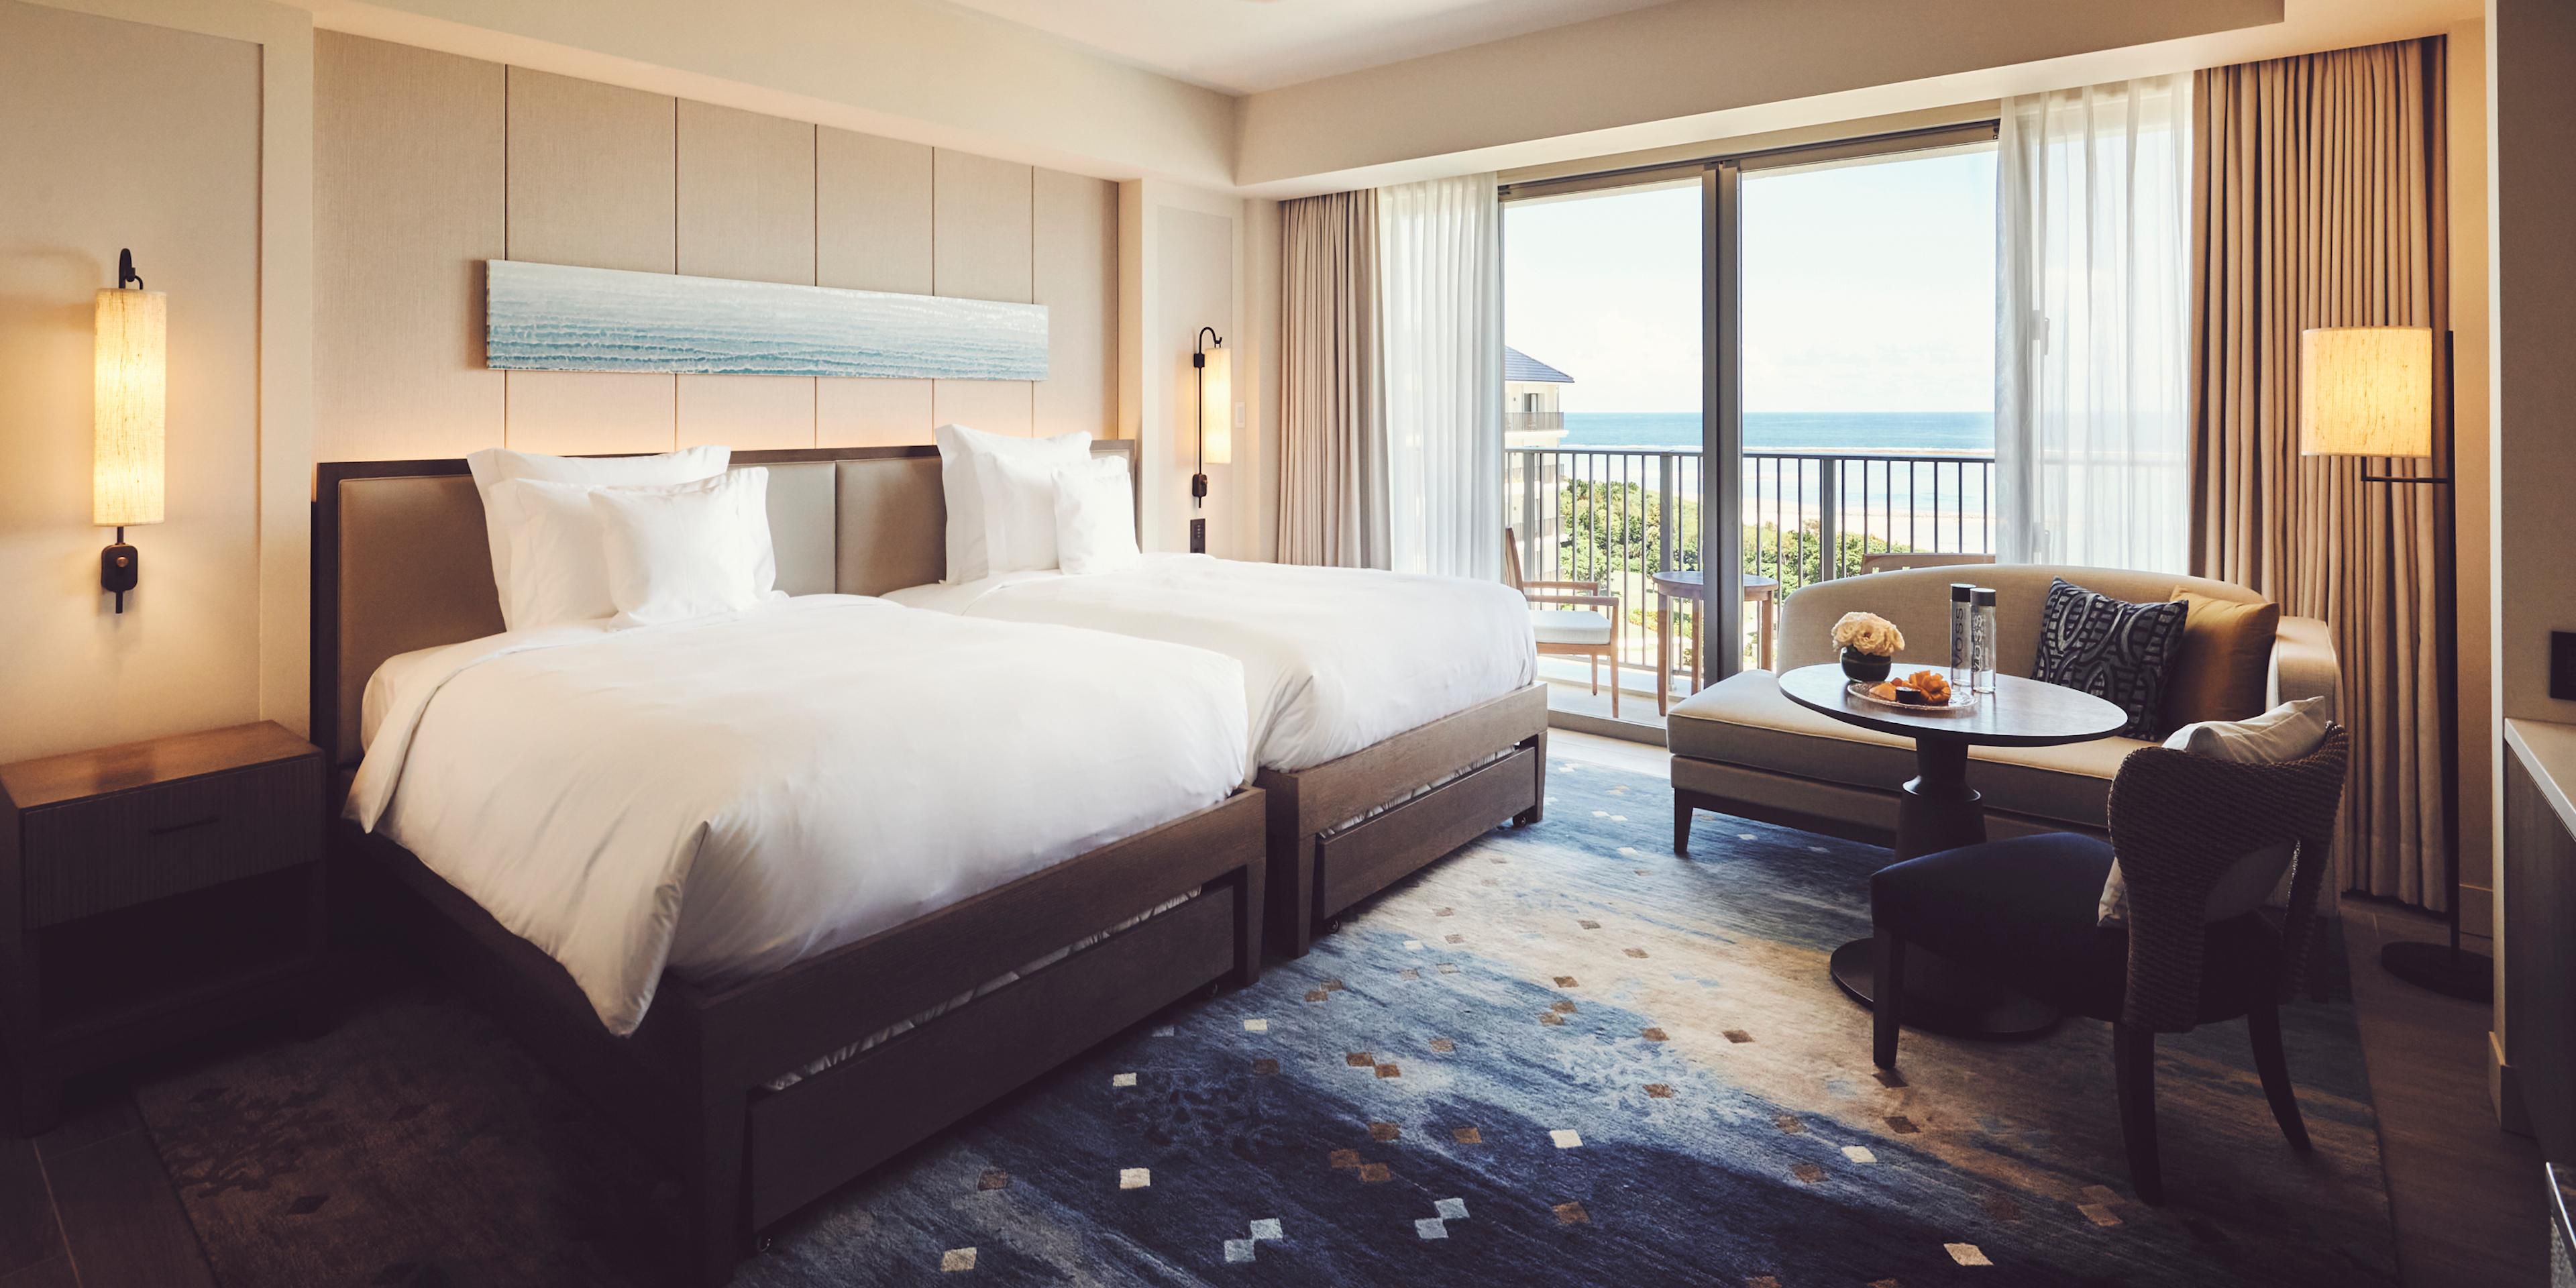 The spacious 43.2 m² ocean-view room with a balcony overlooking the emerald green Pacific Ocean has a modern interior based on white, reminiscent of Ishigaki Island's traditional style beauty and tropical mood. It has been. It has a stylish spa-inspired open bathroom and a 55-inch LCD TV.